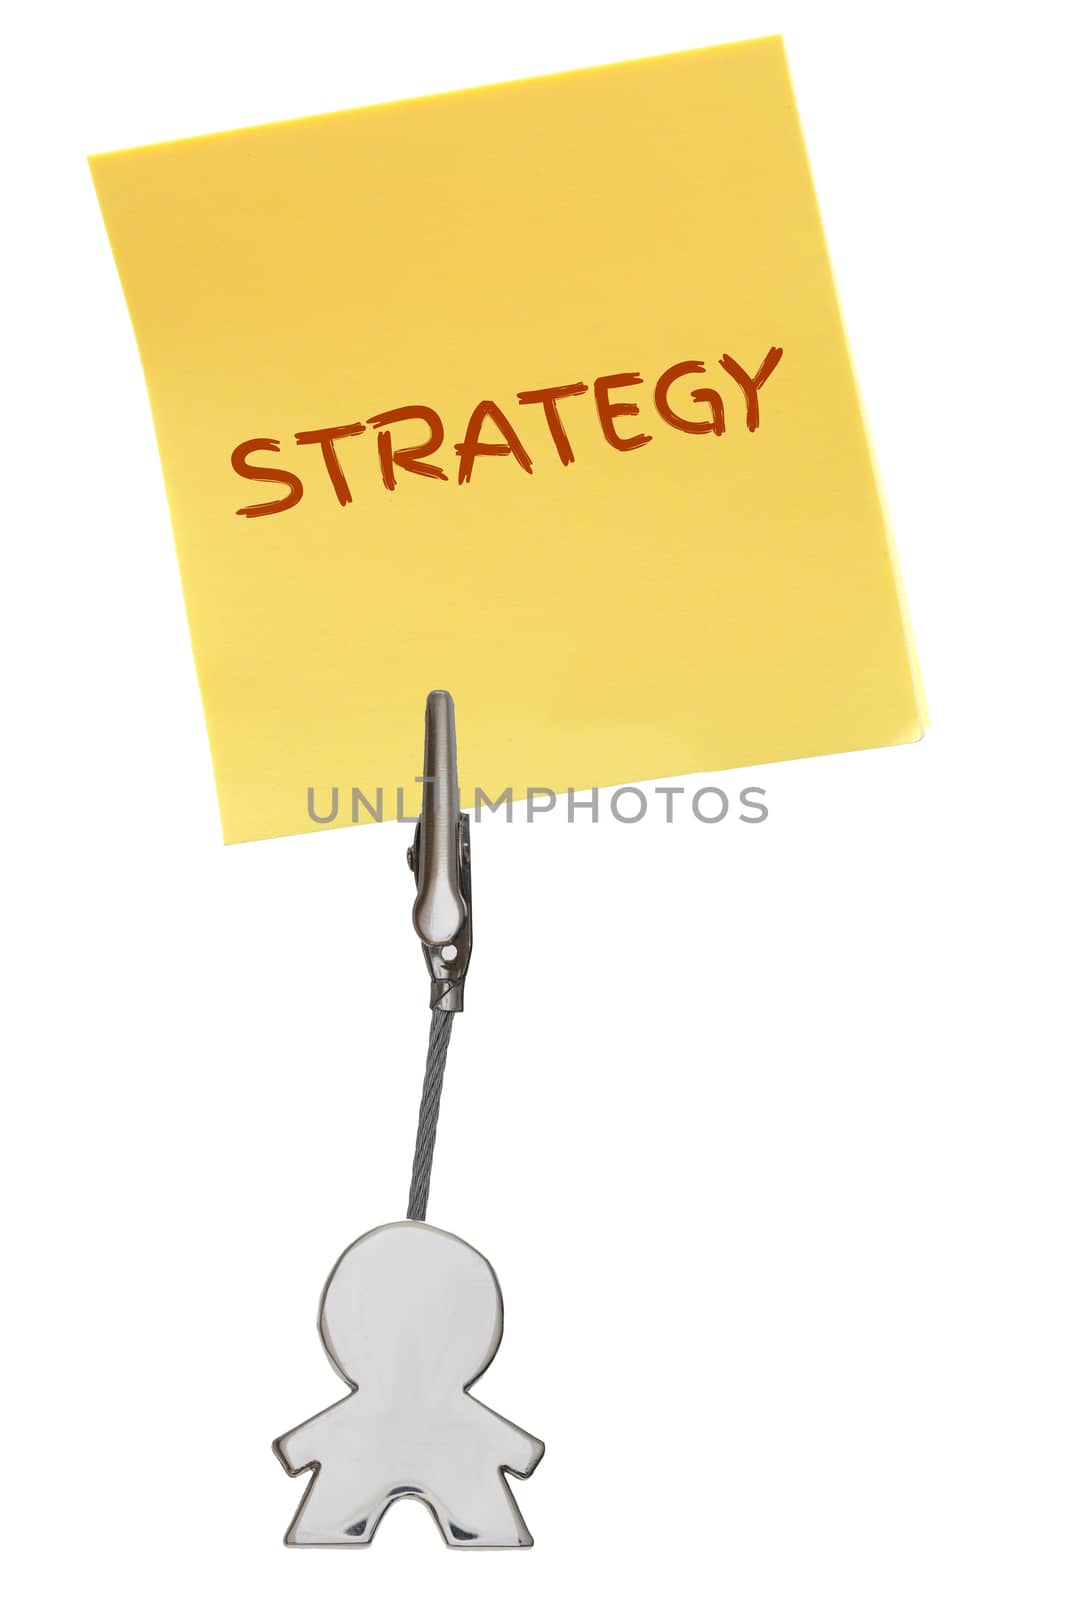 Man Figure Business Card Holder with yellow paper note STRATEGY by asafaric